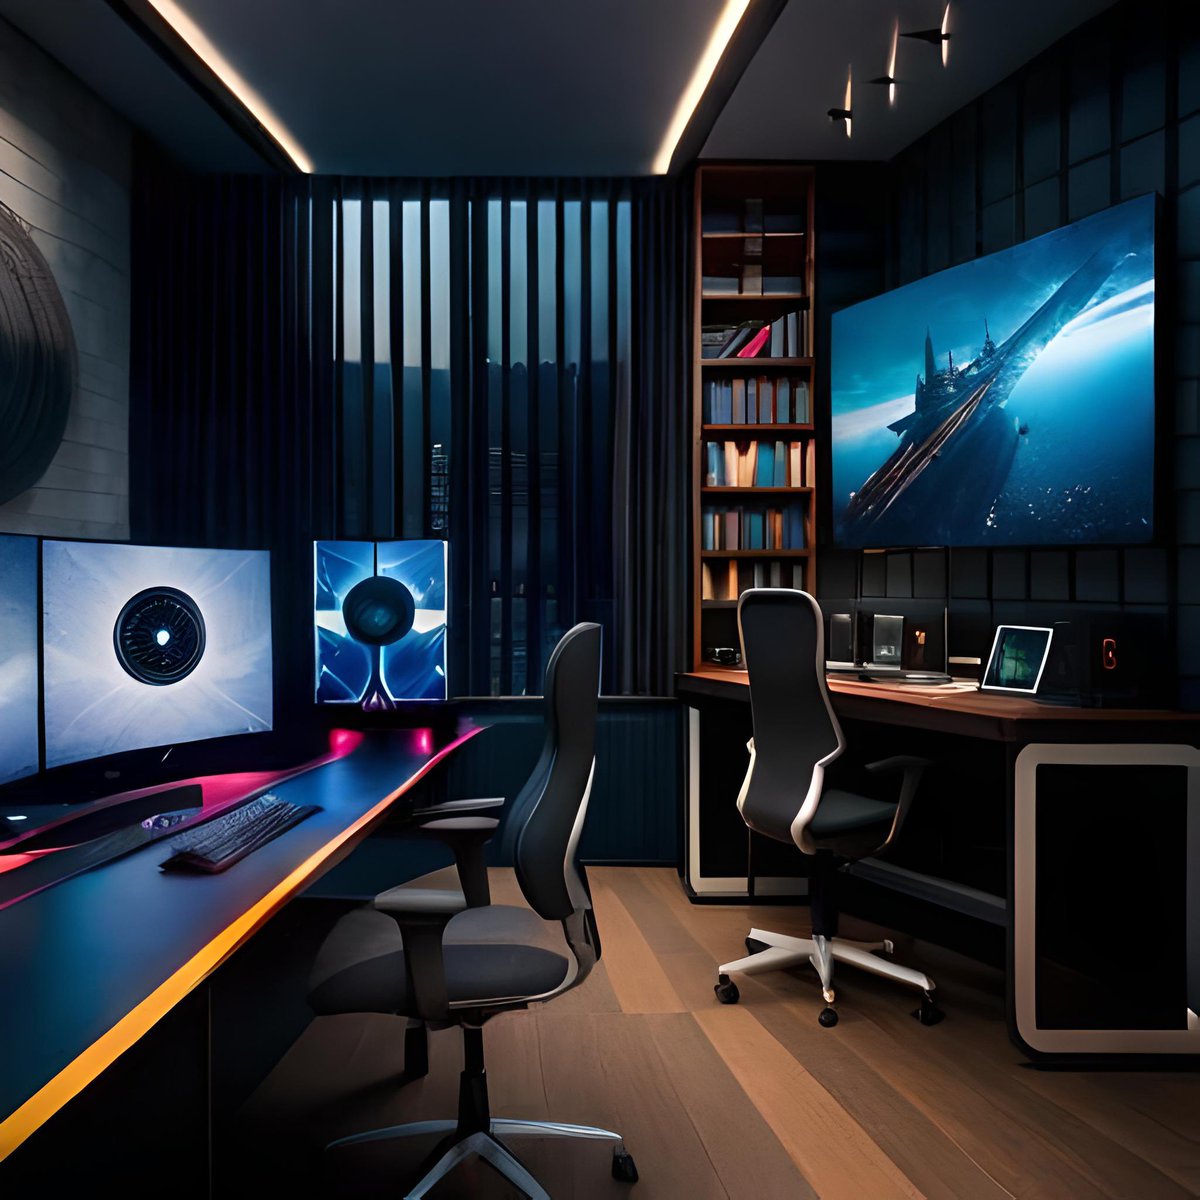 Dream room 
#ai #aiart #aiartcommunity #aiartwork #fyp #fypシ #viral #dreamroom #dream #gamingpc #gamingroom #gamingsetup #GraphicDesign #GraphicDesigner .